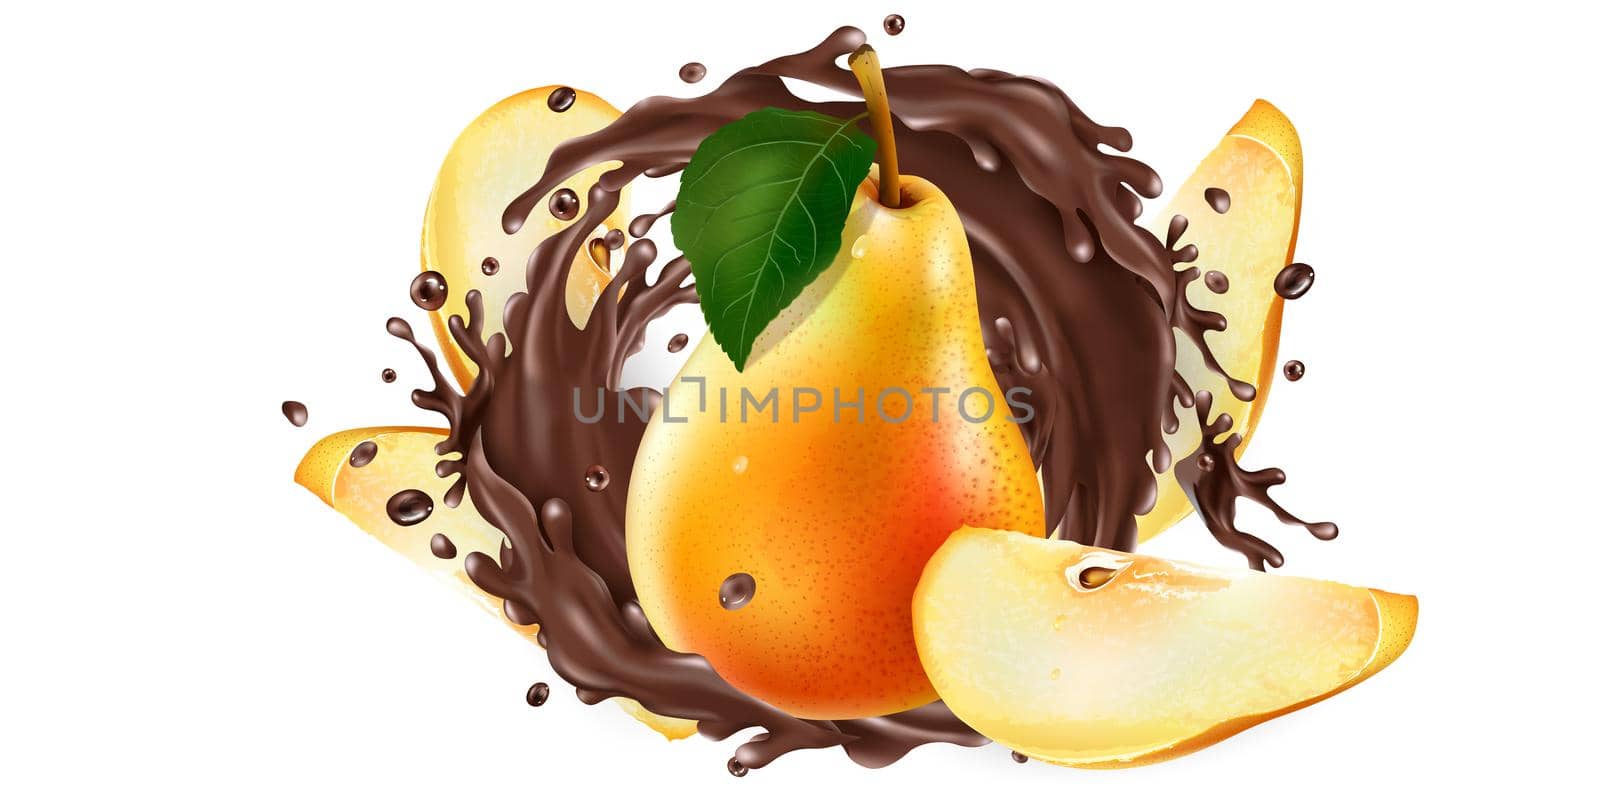 Fresh pears and a splash of liquid chocolate on a white background. Realistic style illustration.